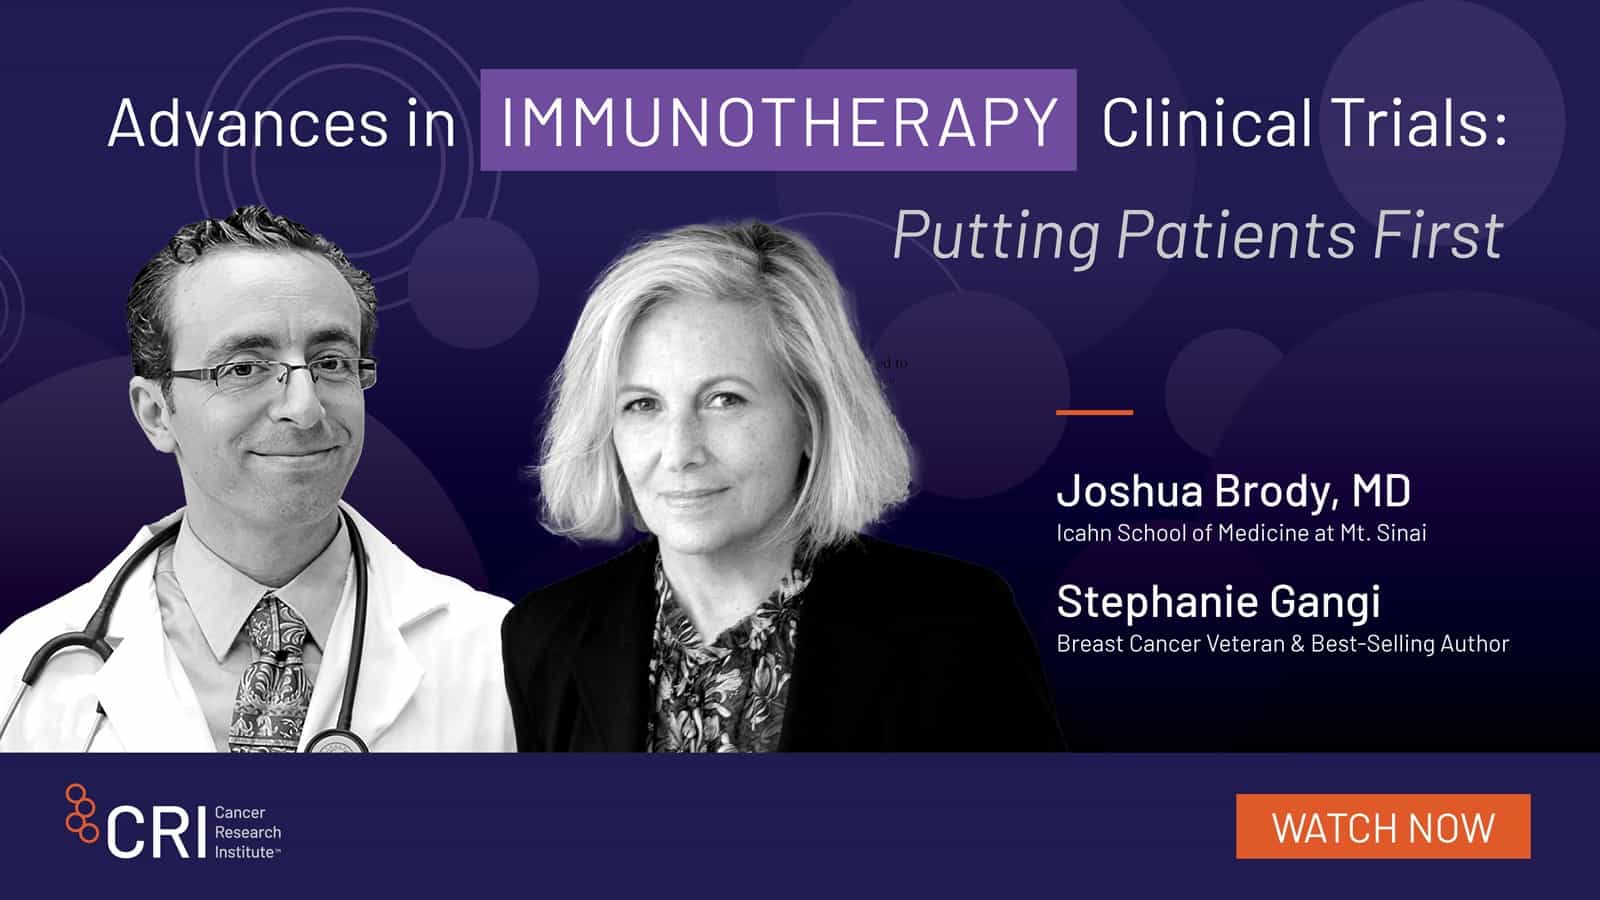 Dr. Joshua Brody and breast cancer patient Stephanie Gangi, CRI Webinar - Patient Voices and Clinical Trials